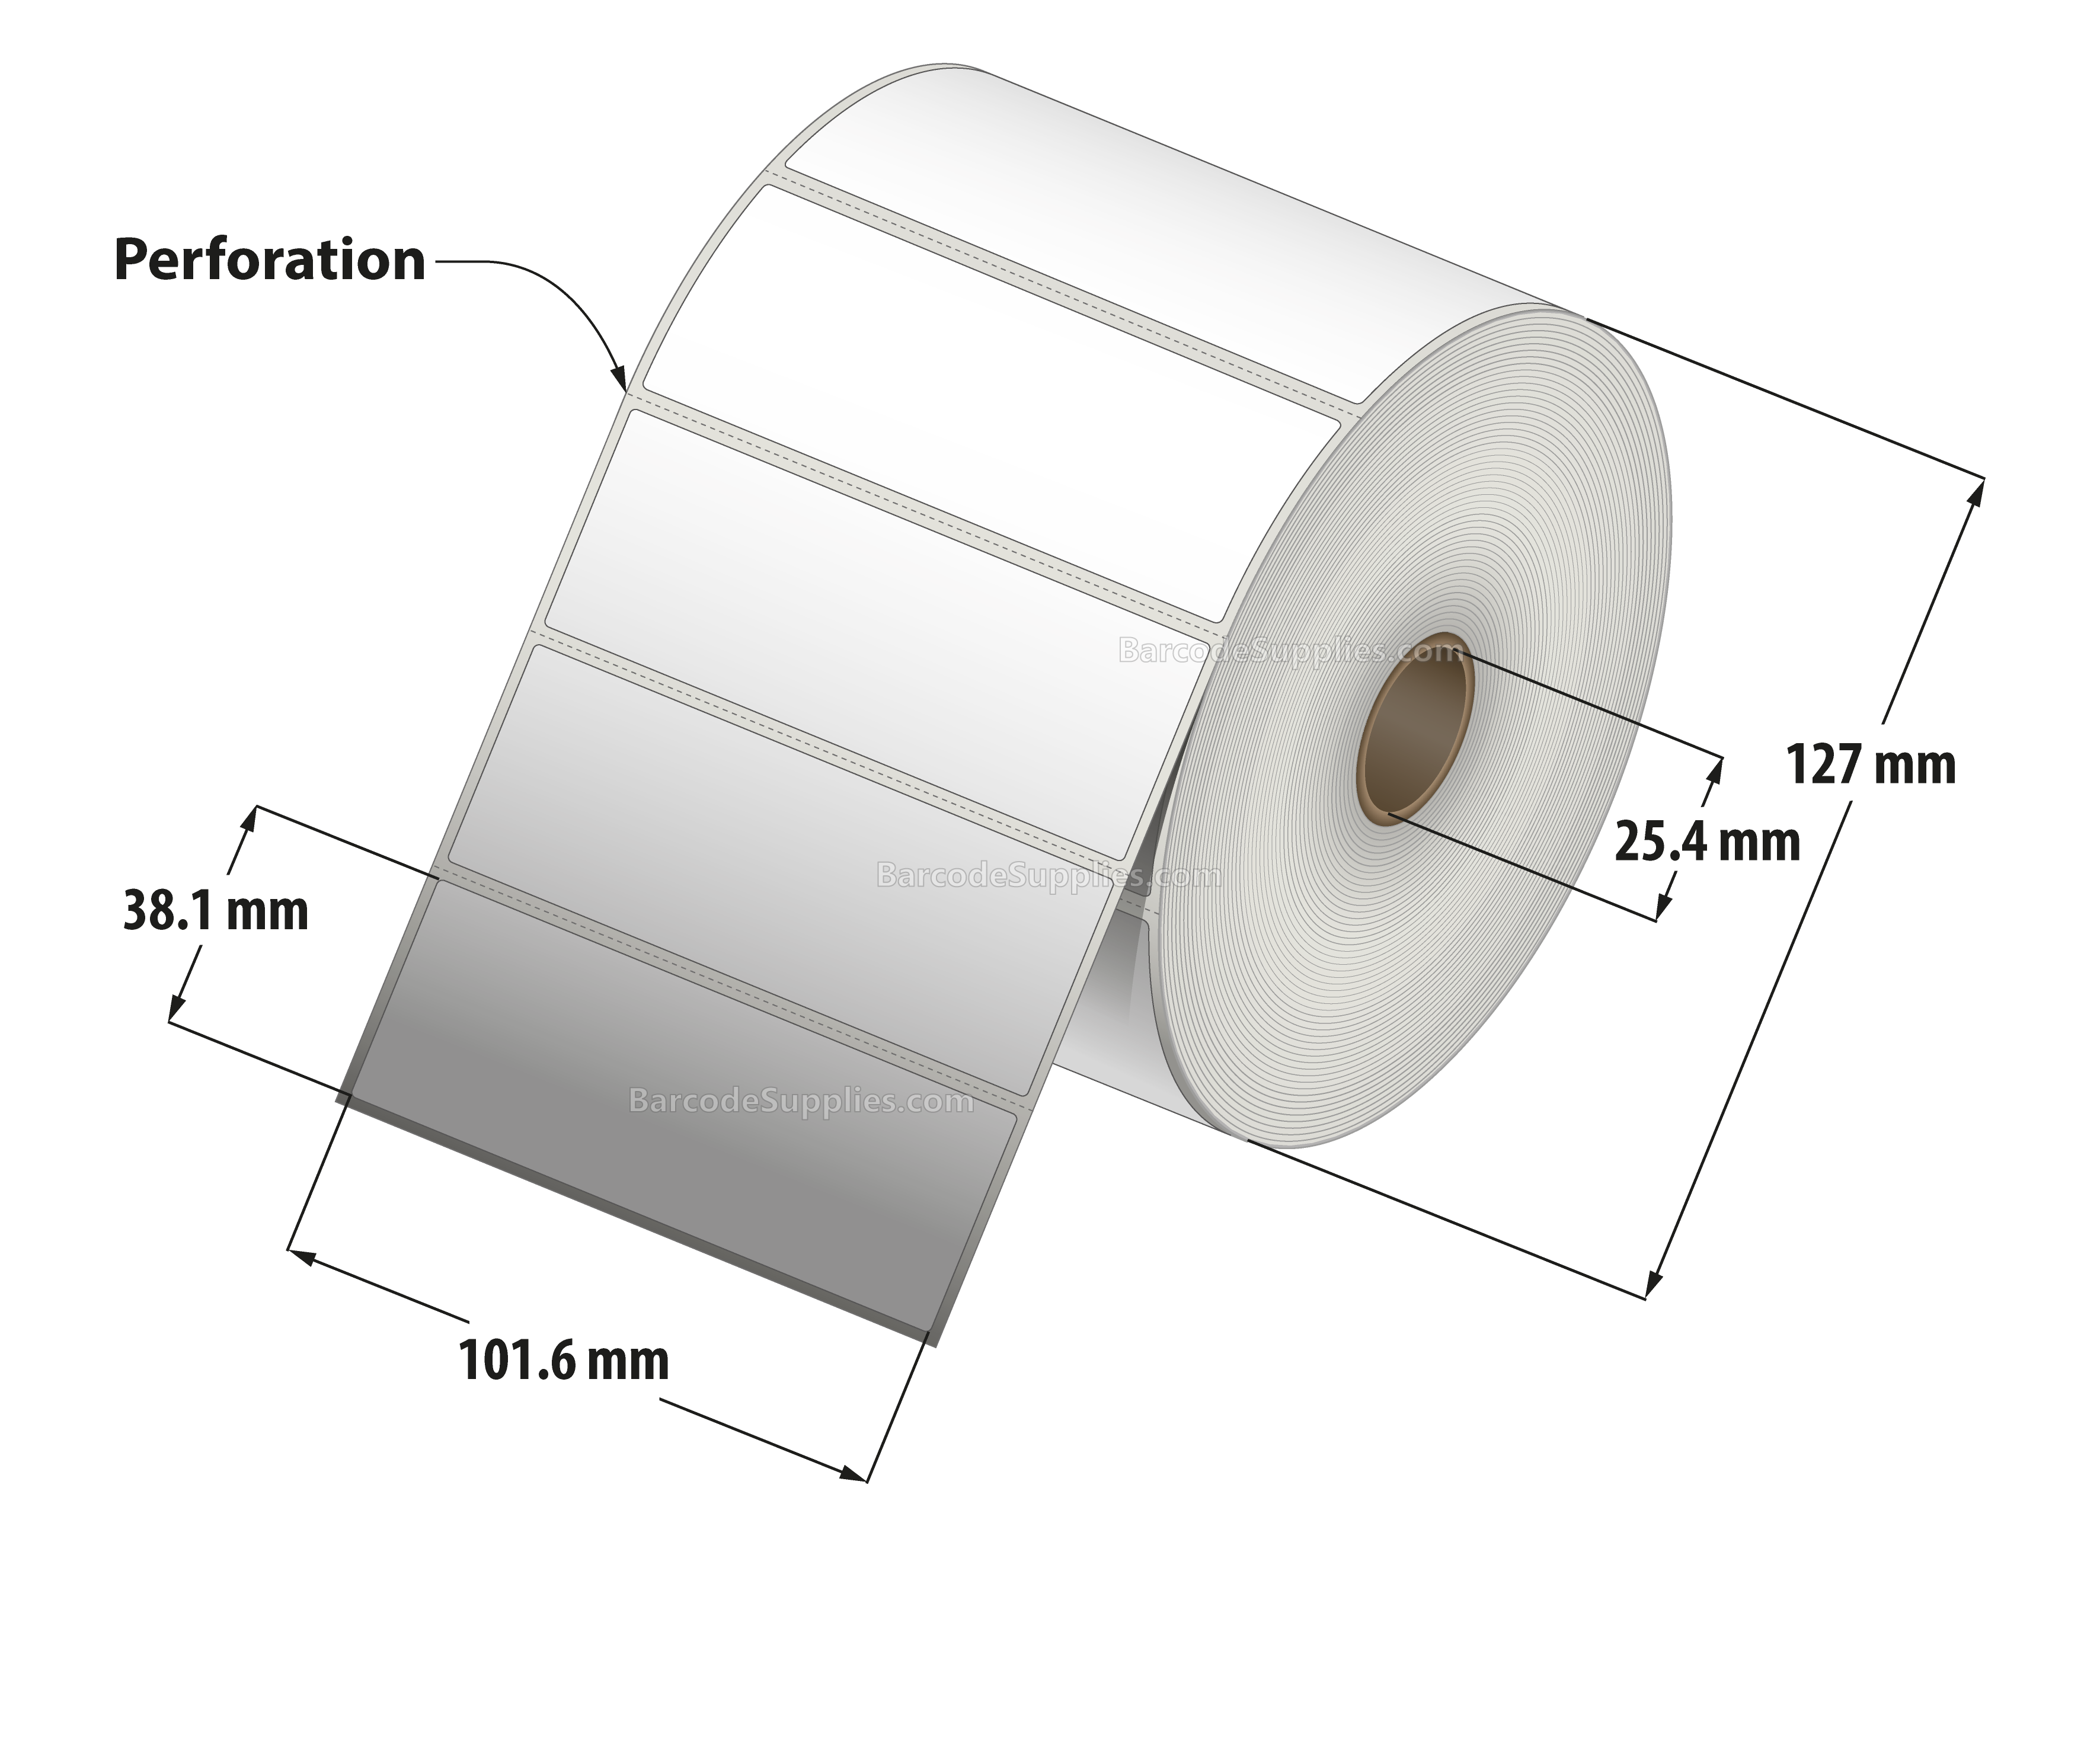 4 x 1.5 Direct Thermal White Labels With Acrylic Adhesive - Perforated - 1800 Labels Per Roll - Carton Of 12 Rolls - 21600 Labels Total - MPN: RD-4-15-1800-1 - BarcodeSource, Inc.